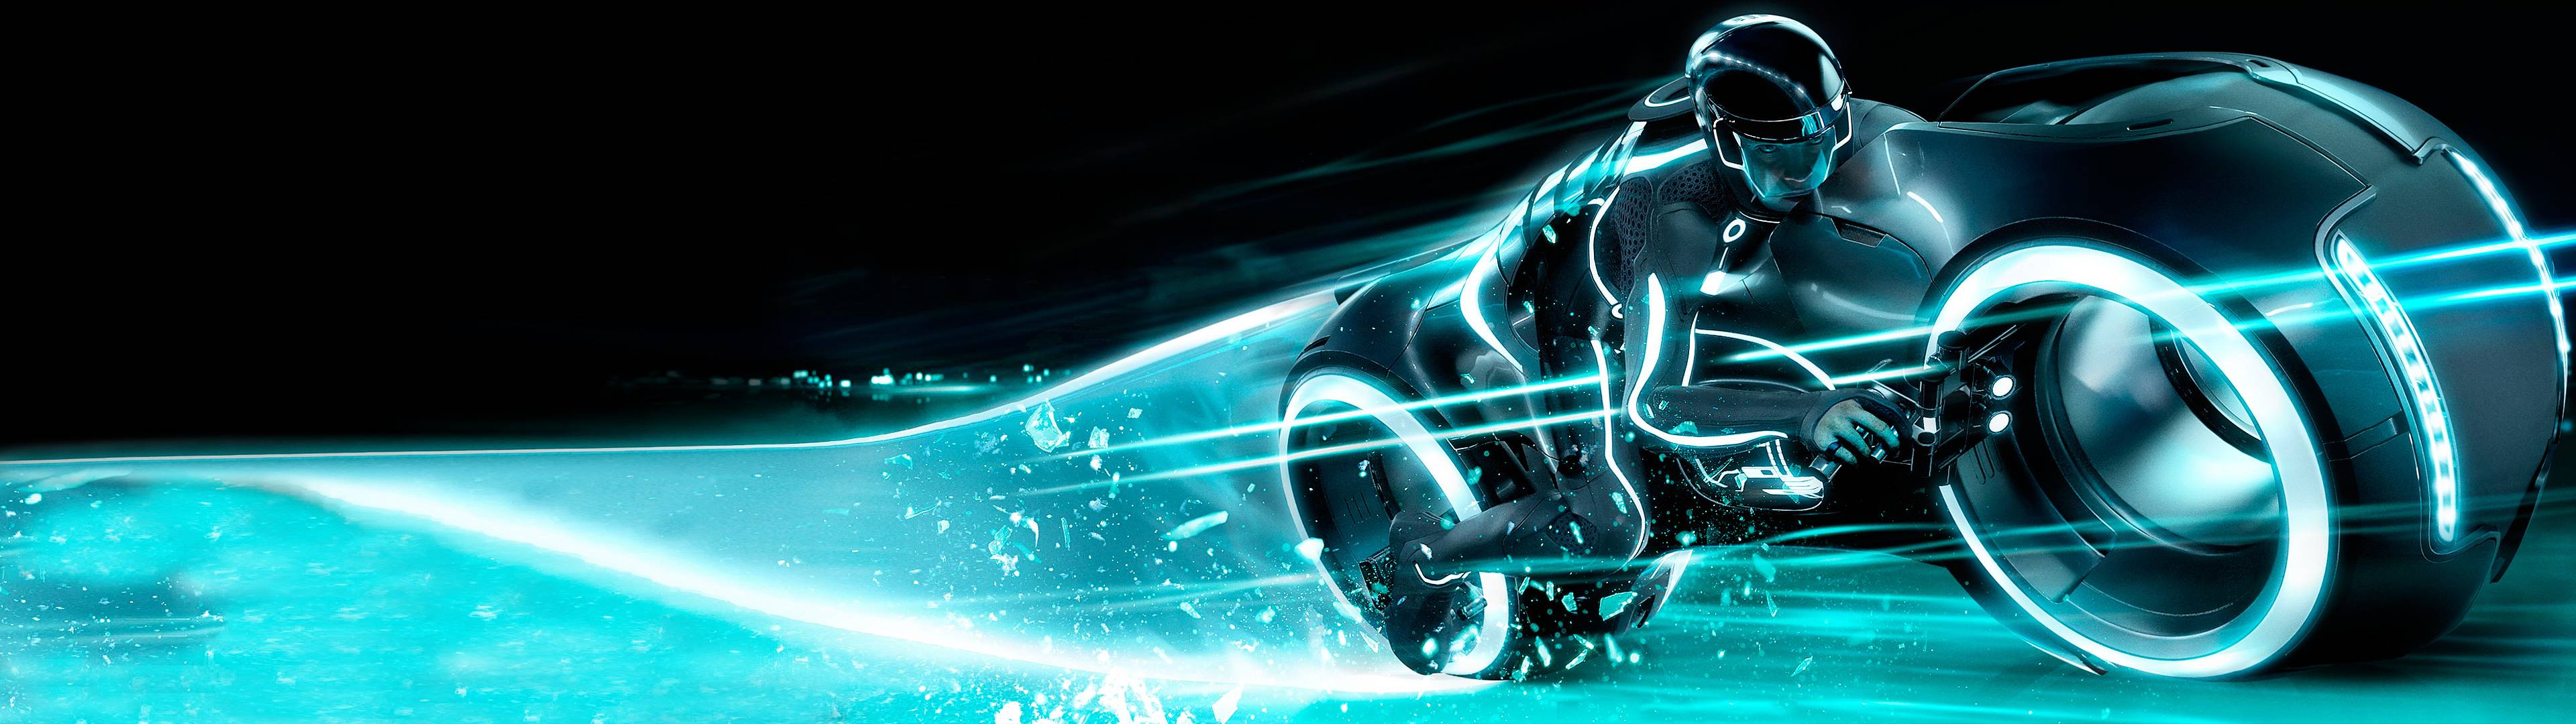 Tron Lightcycle [3840x1080] [currently in use]